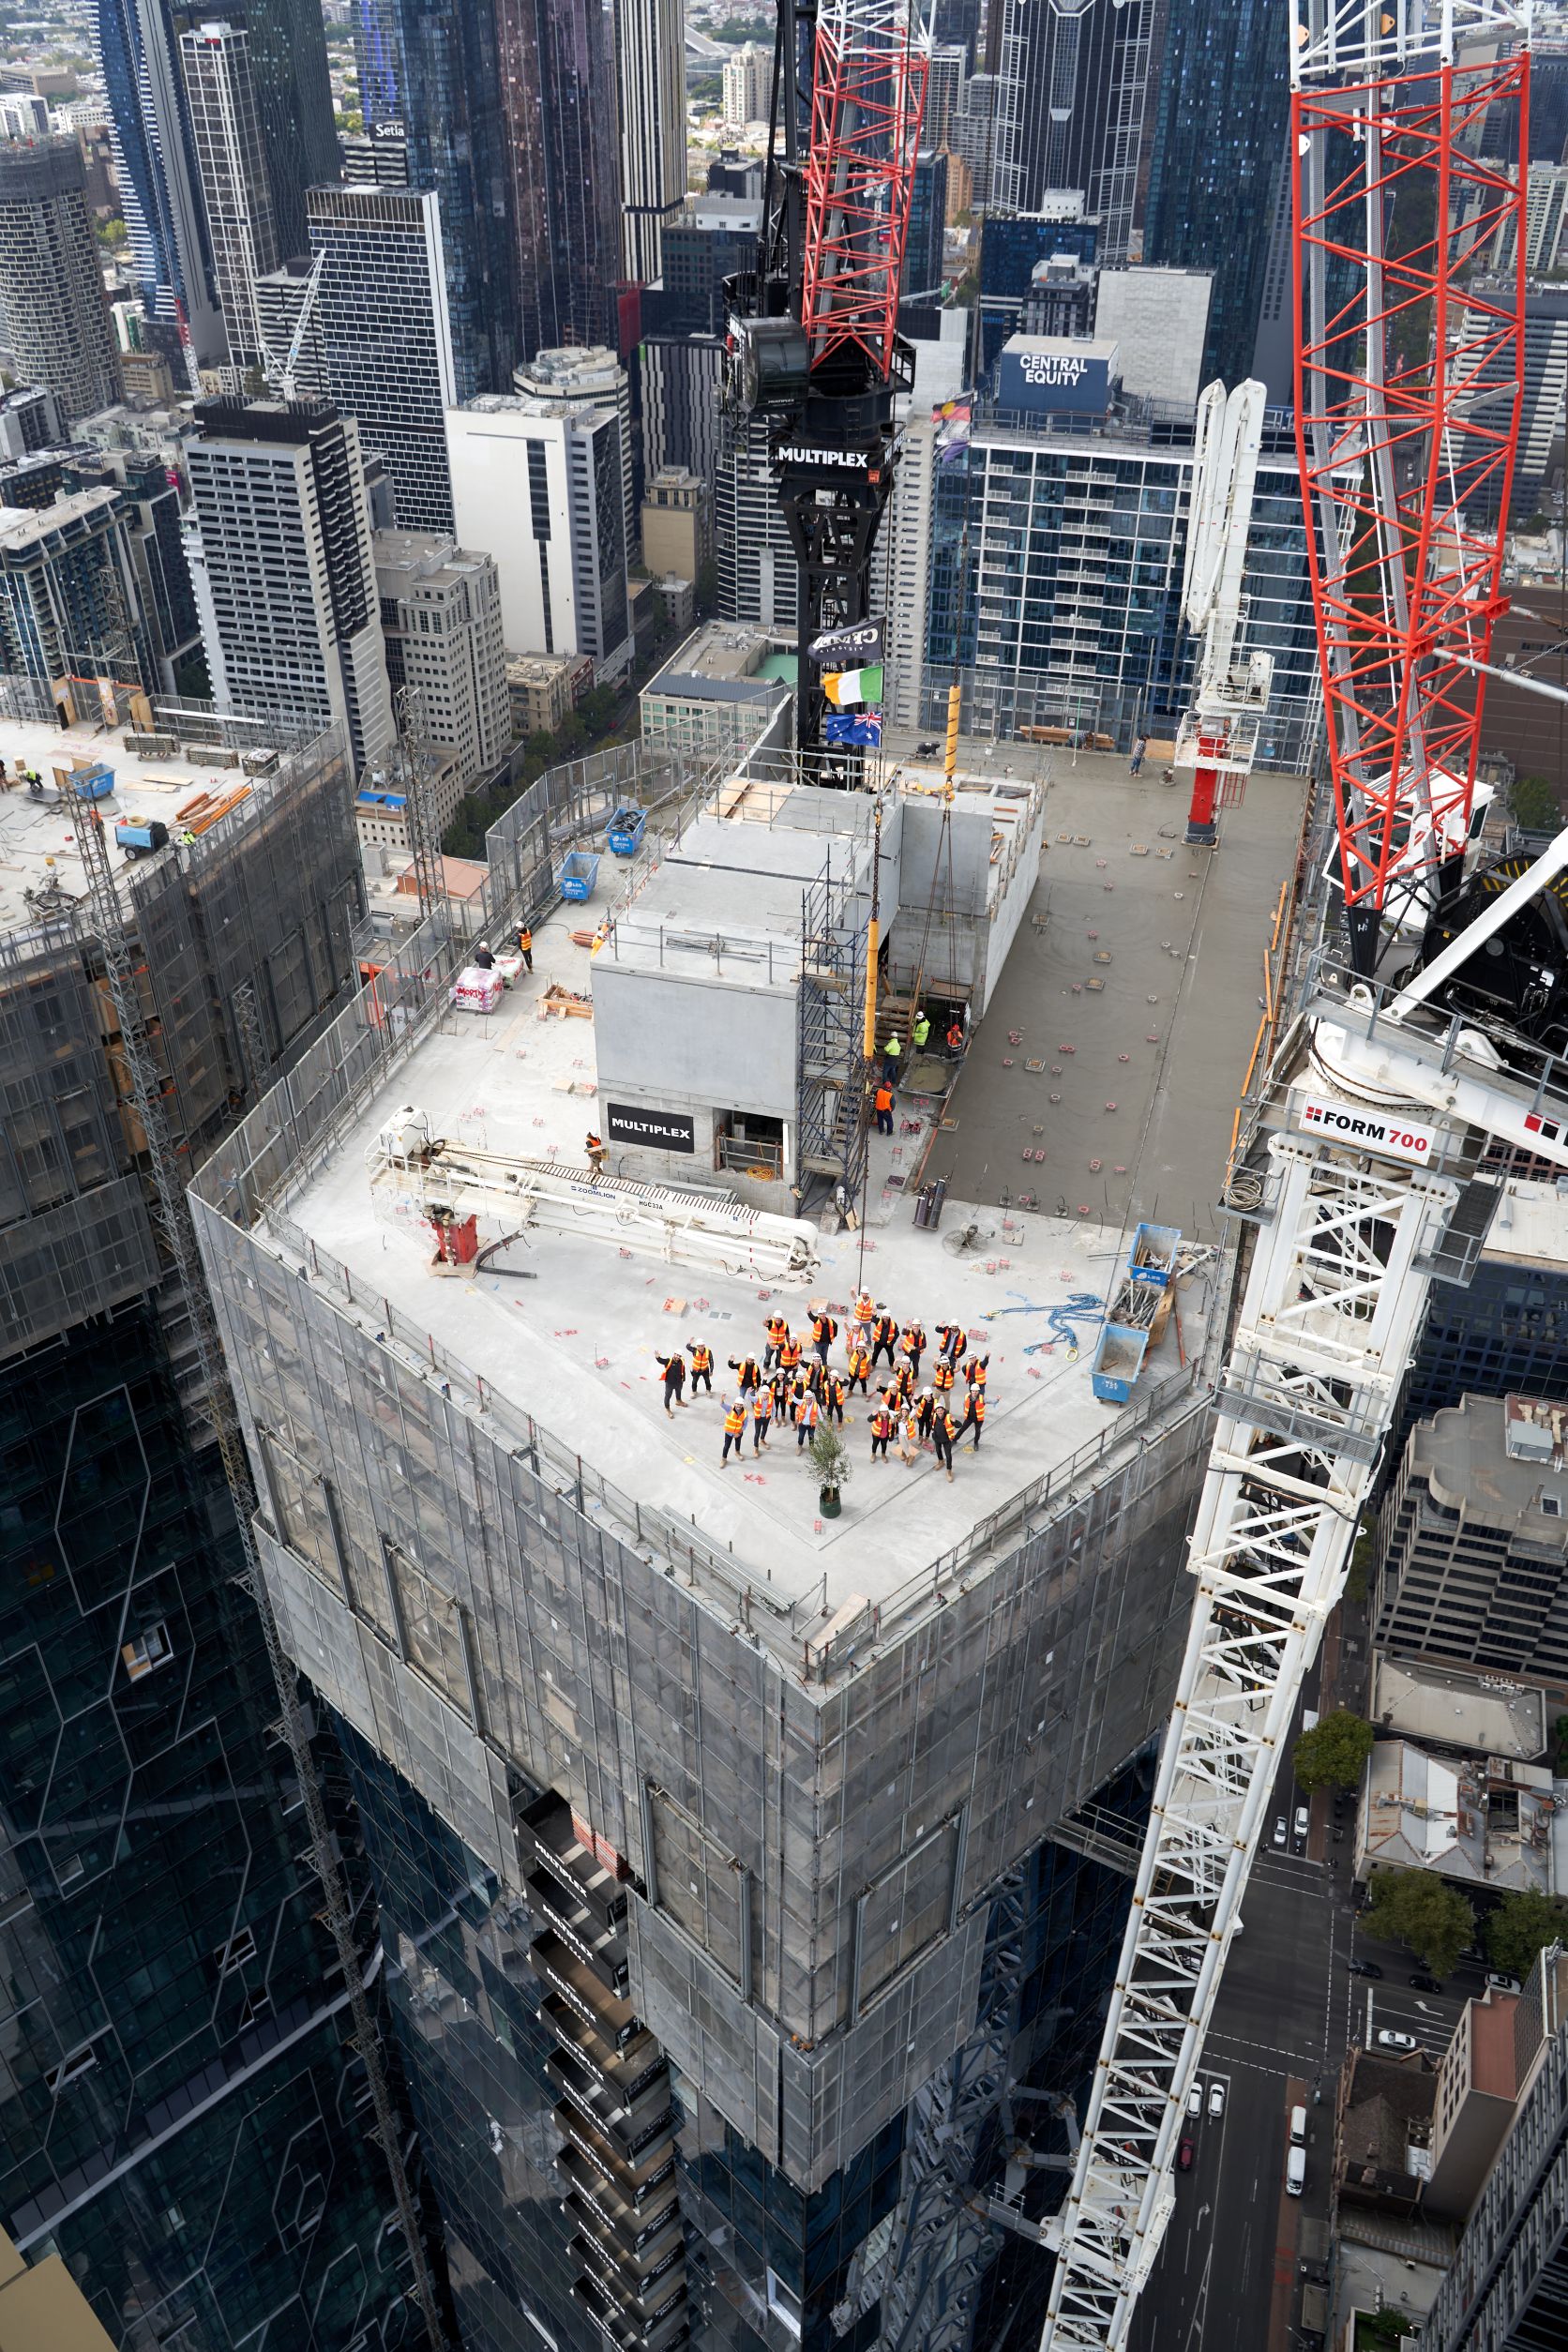 ▲ Multiplex said the project had been significant employment generator, with over 800 workers were on site at peak staffing to achieve the topping out of stage two. Image: Supplied
